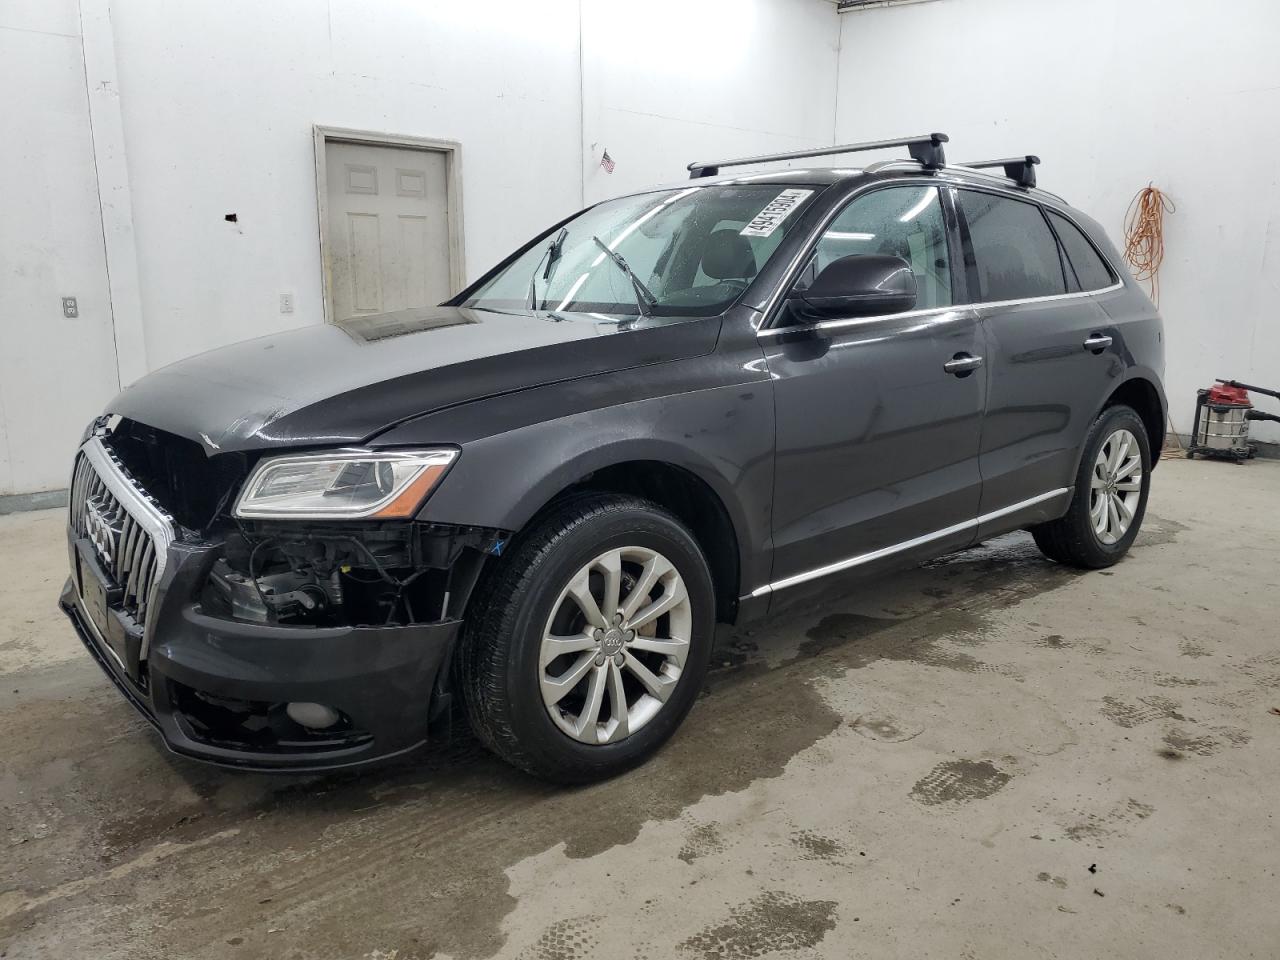 vin: WA1C2AFP2GA034795 WA1C2AFP2GA034795 2016 audi q5 2000 for Sale in 37354 6763, Tn - Knoxville, Madisonville, USA